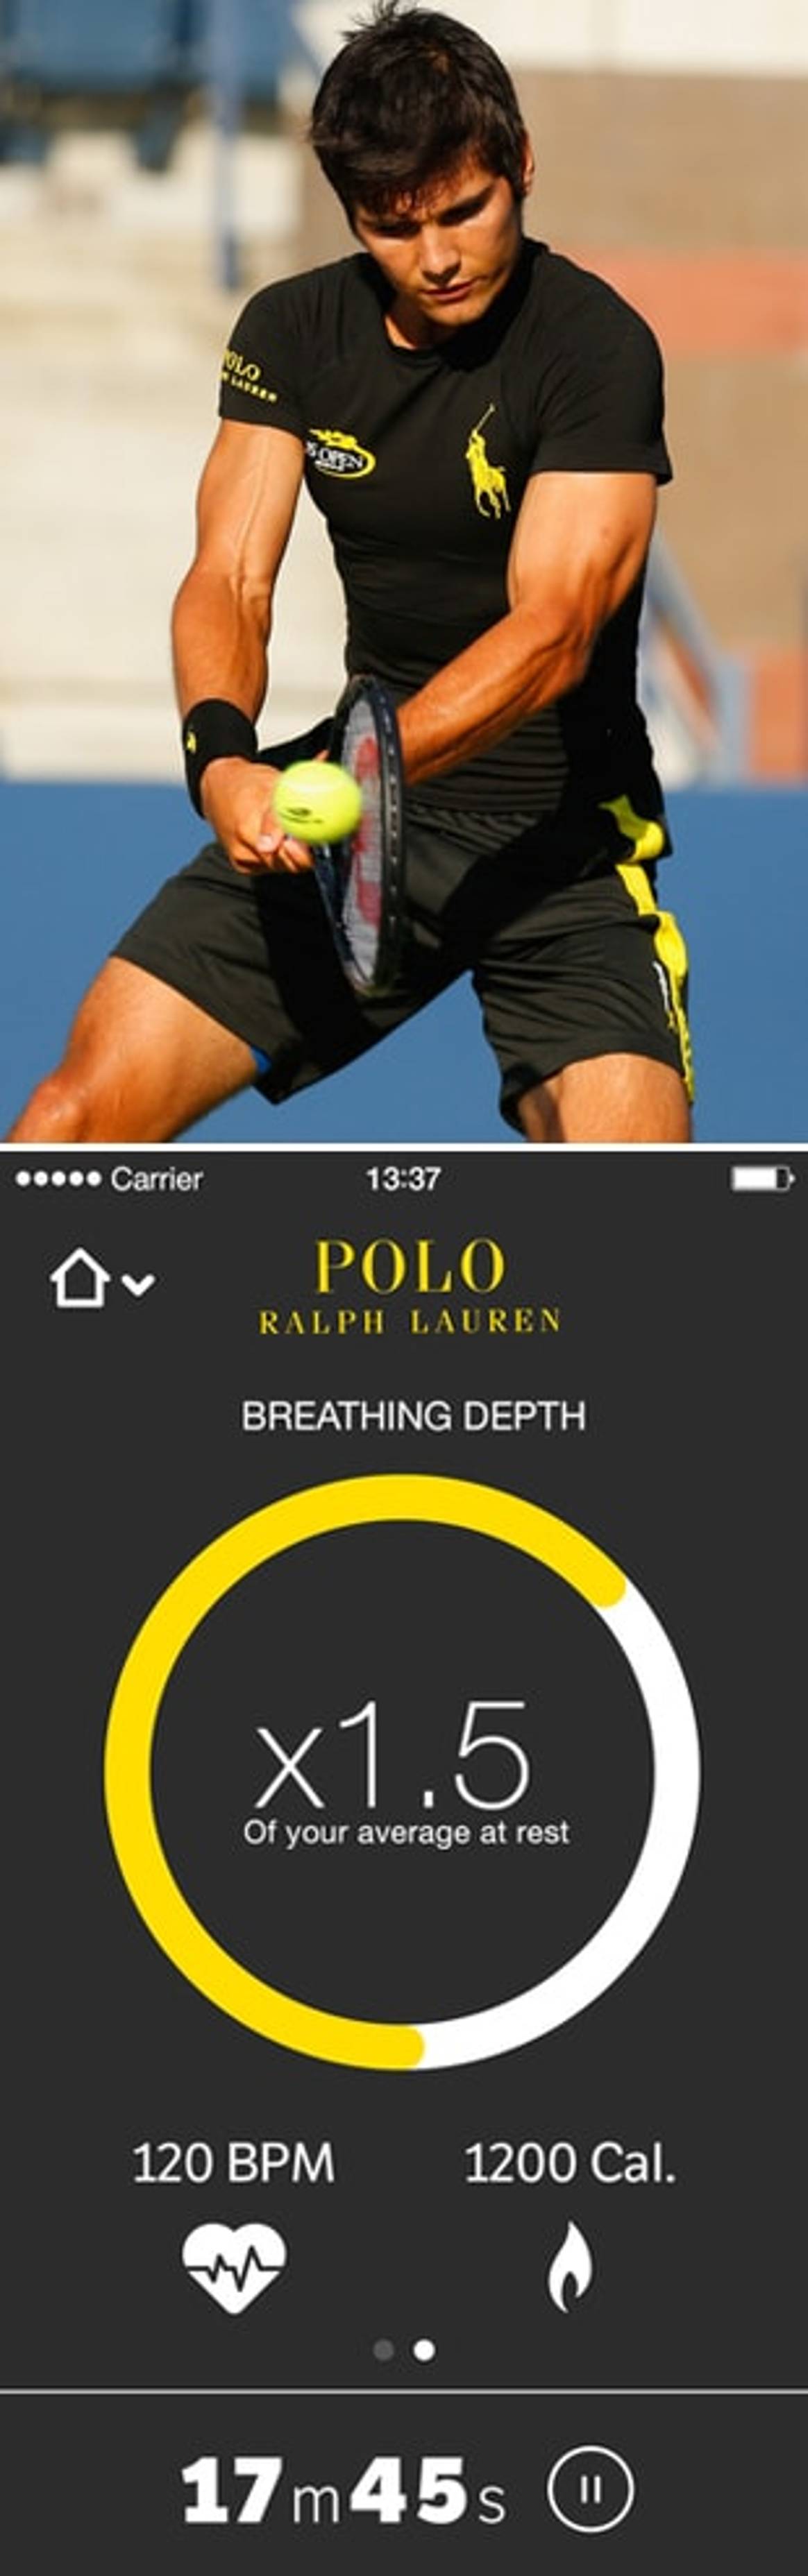 Ralph Lauren introduces the next step in wearable tech: the Polo